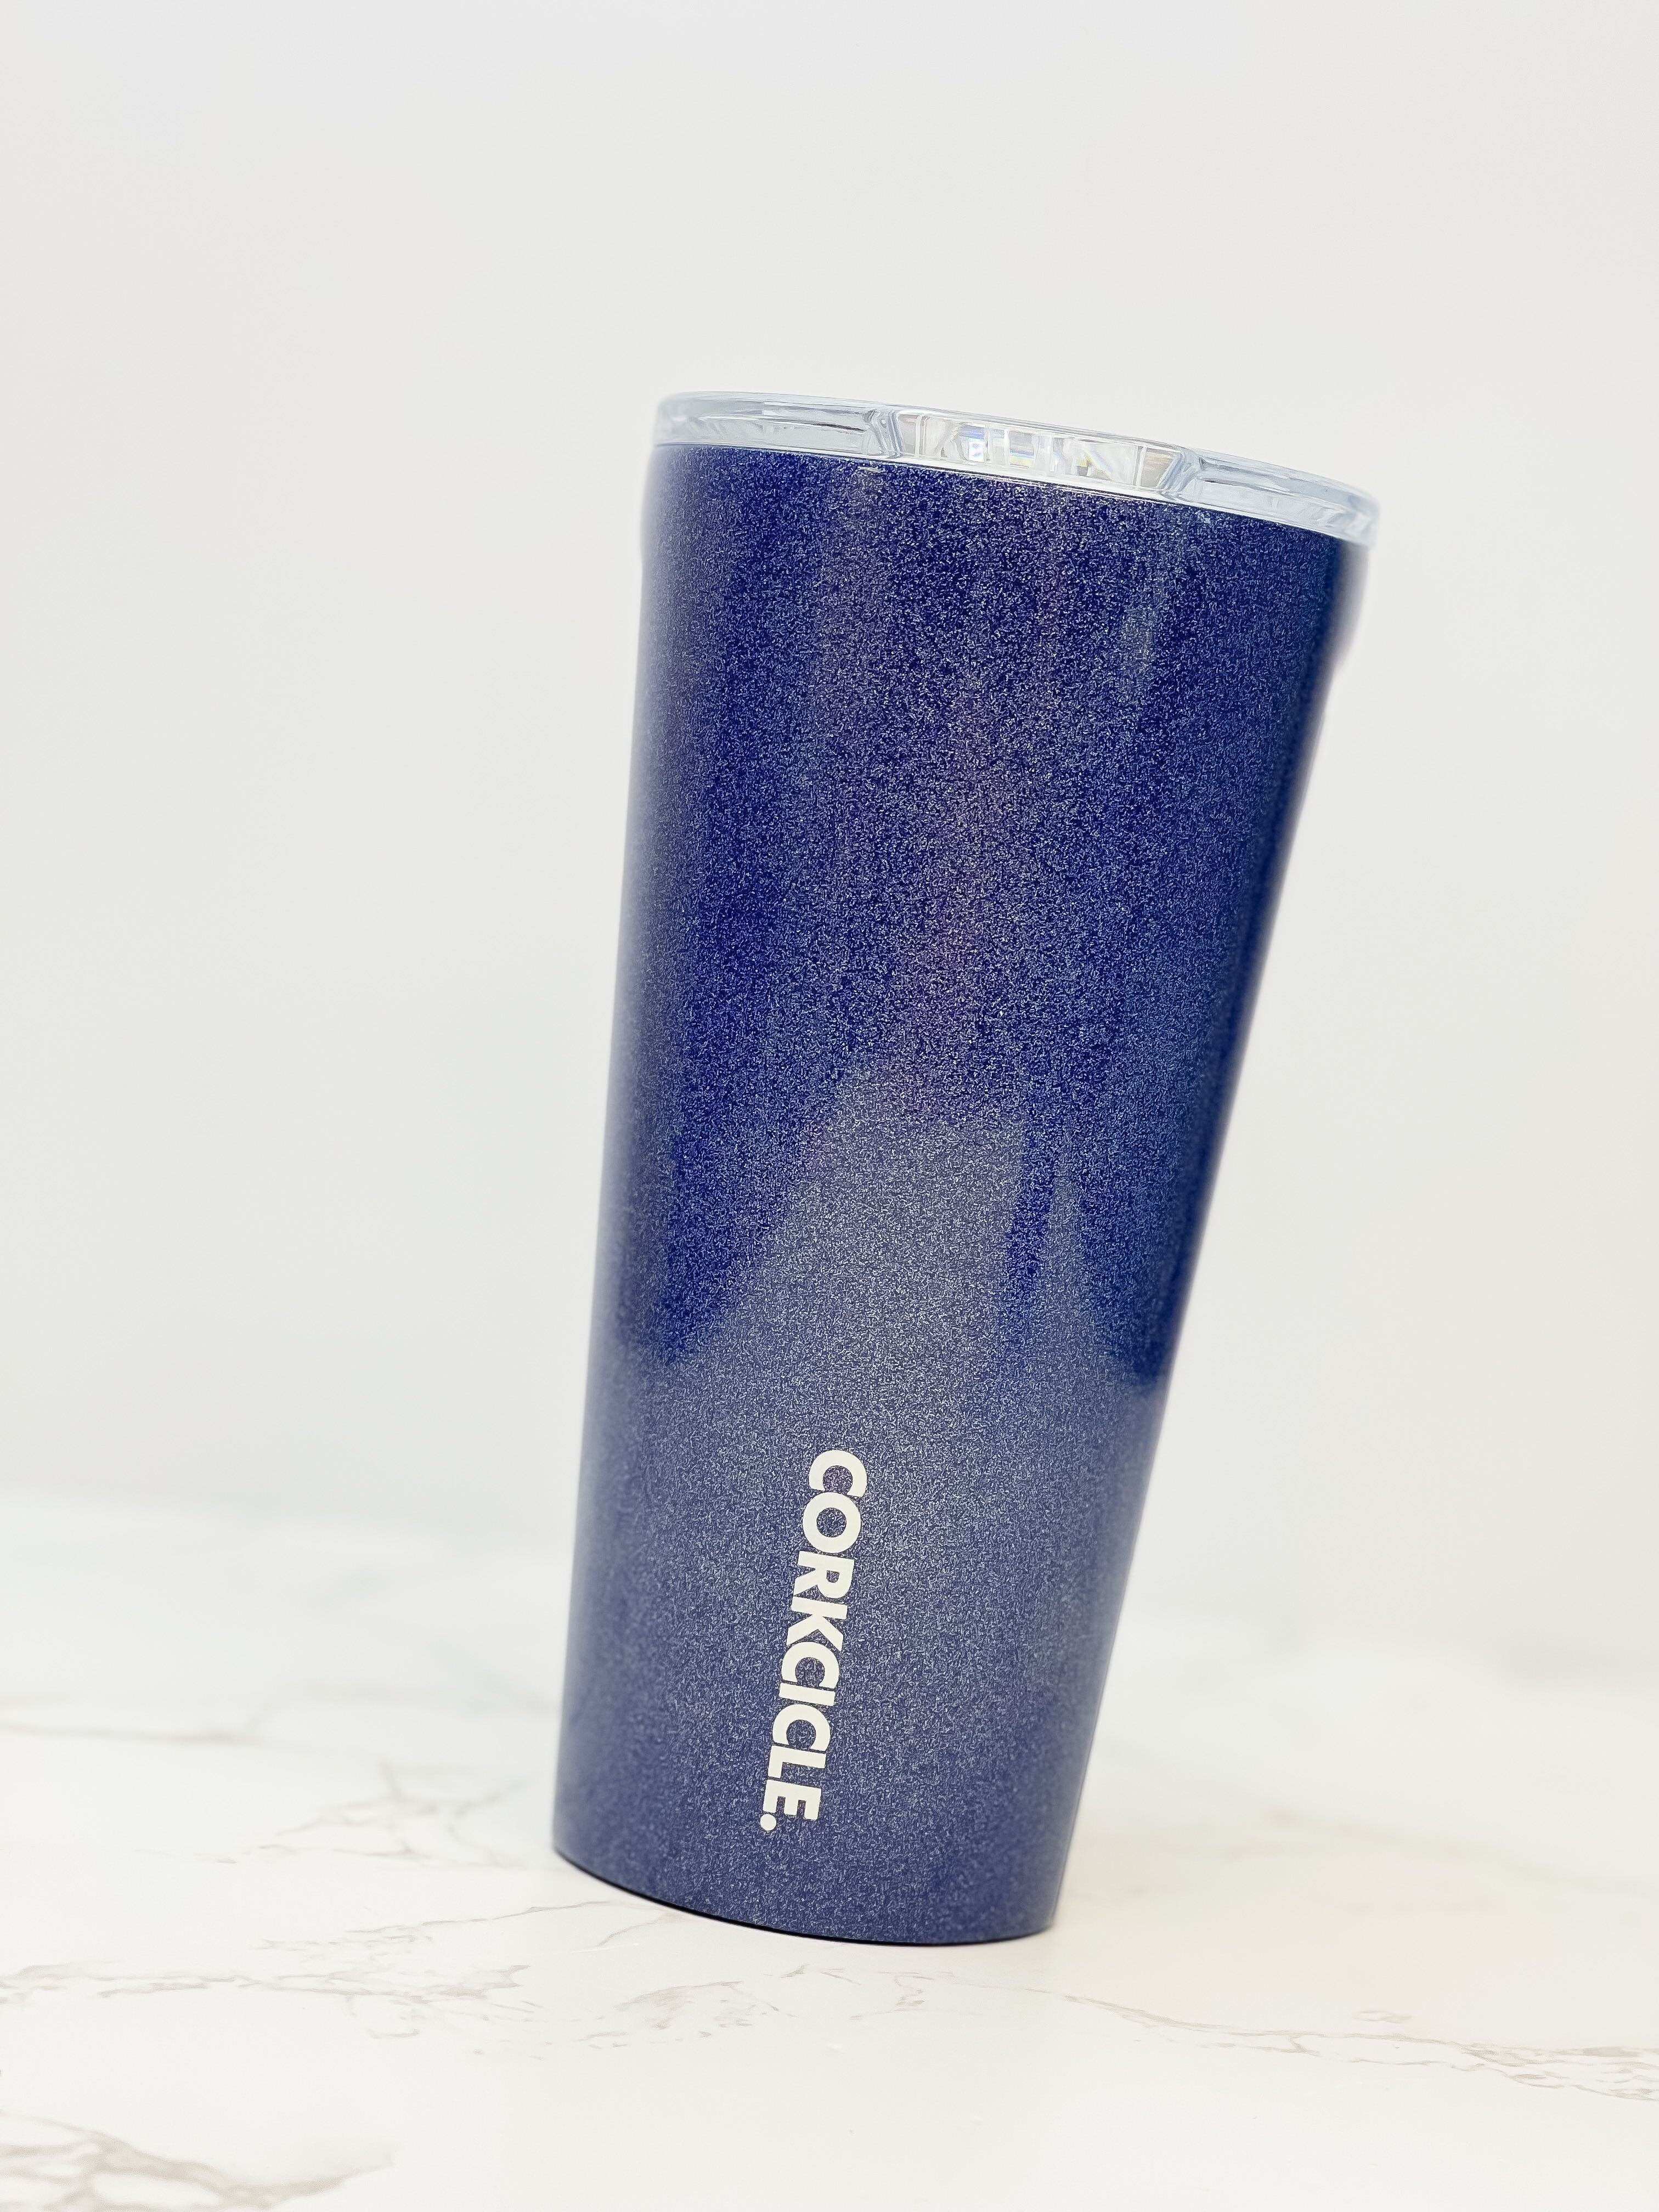 Midnight Magic 16 oz Stainless Steel Tumbler by Corkcicle